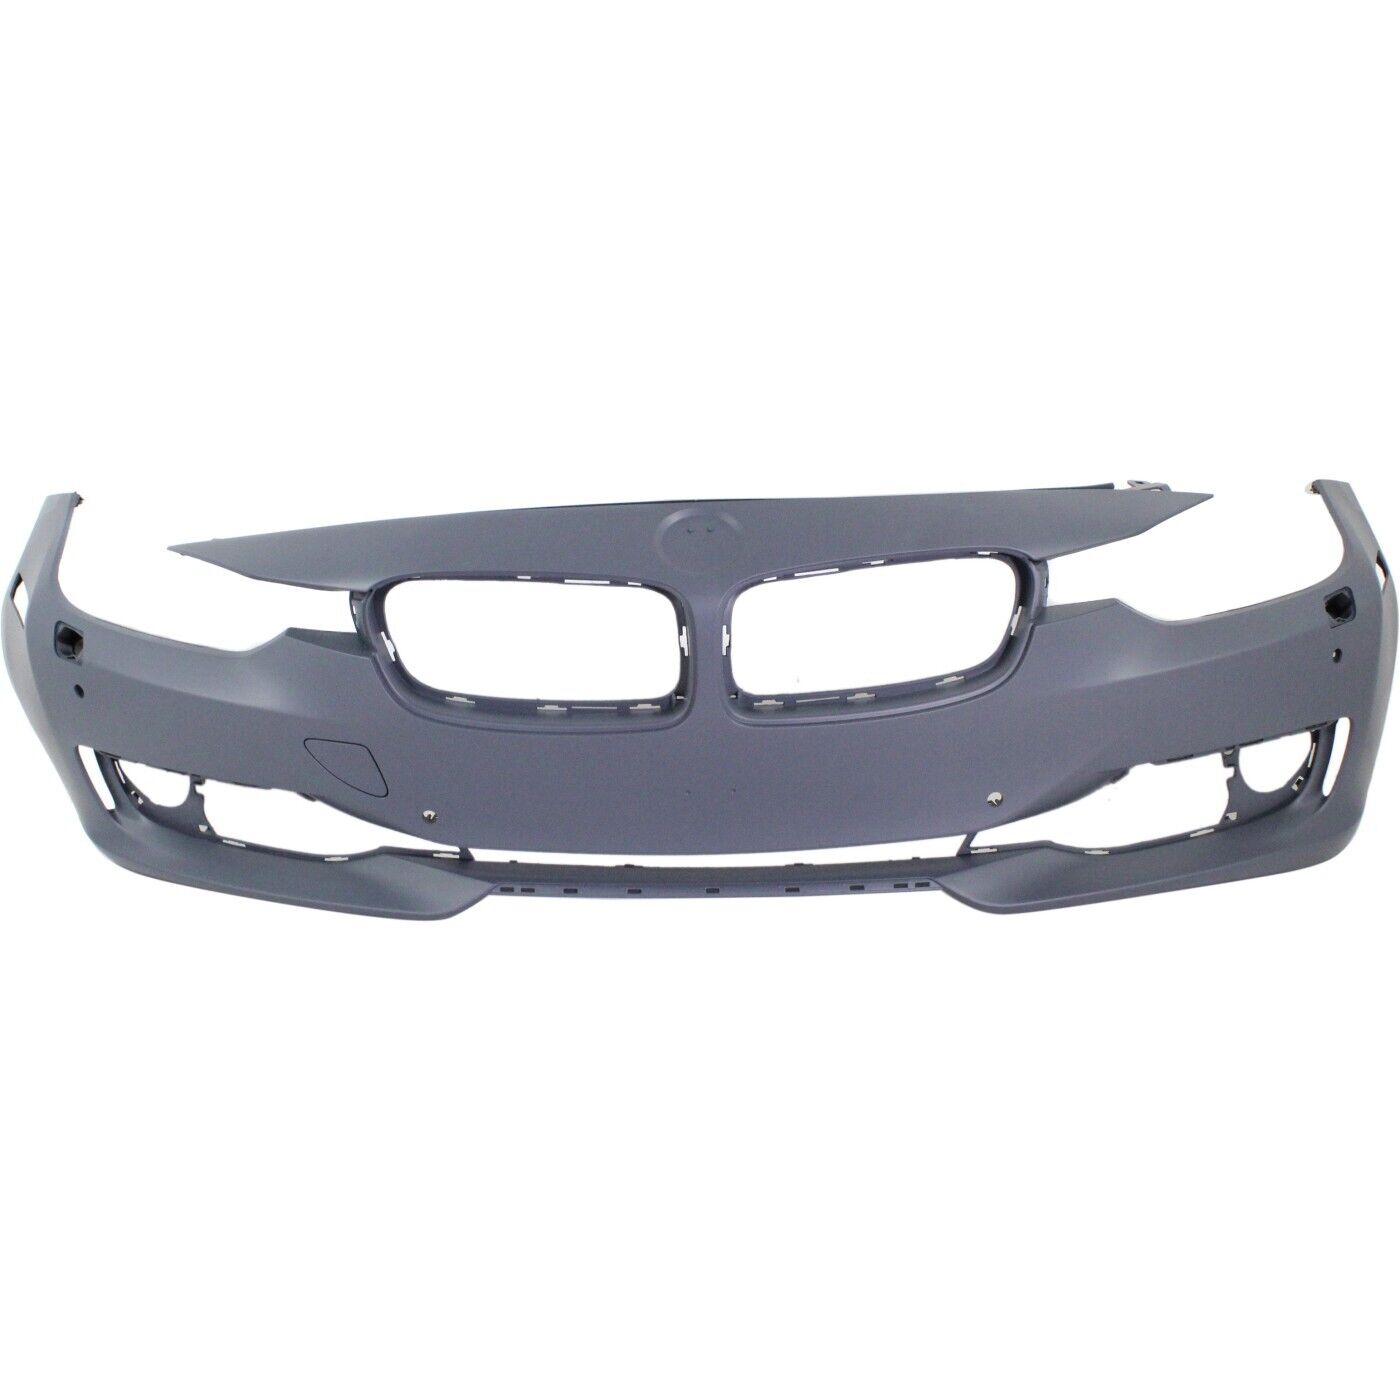 Front Bumper Cover For 2012-15 BMW 328i Modern/Luxury/Sport w/ HLW/PDC Holes